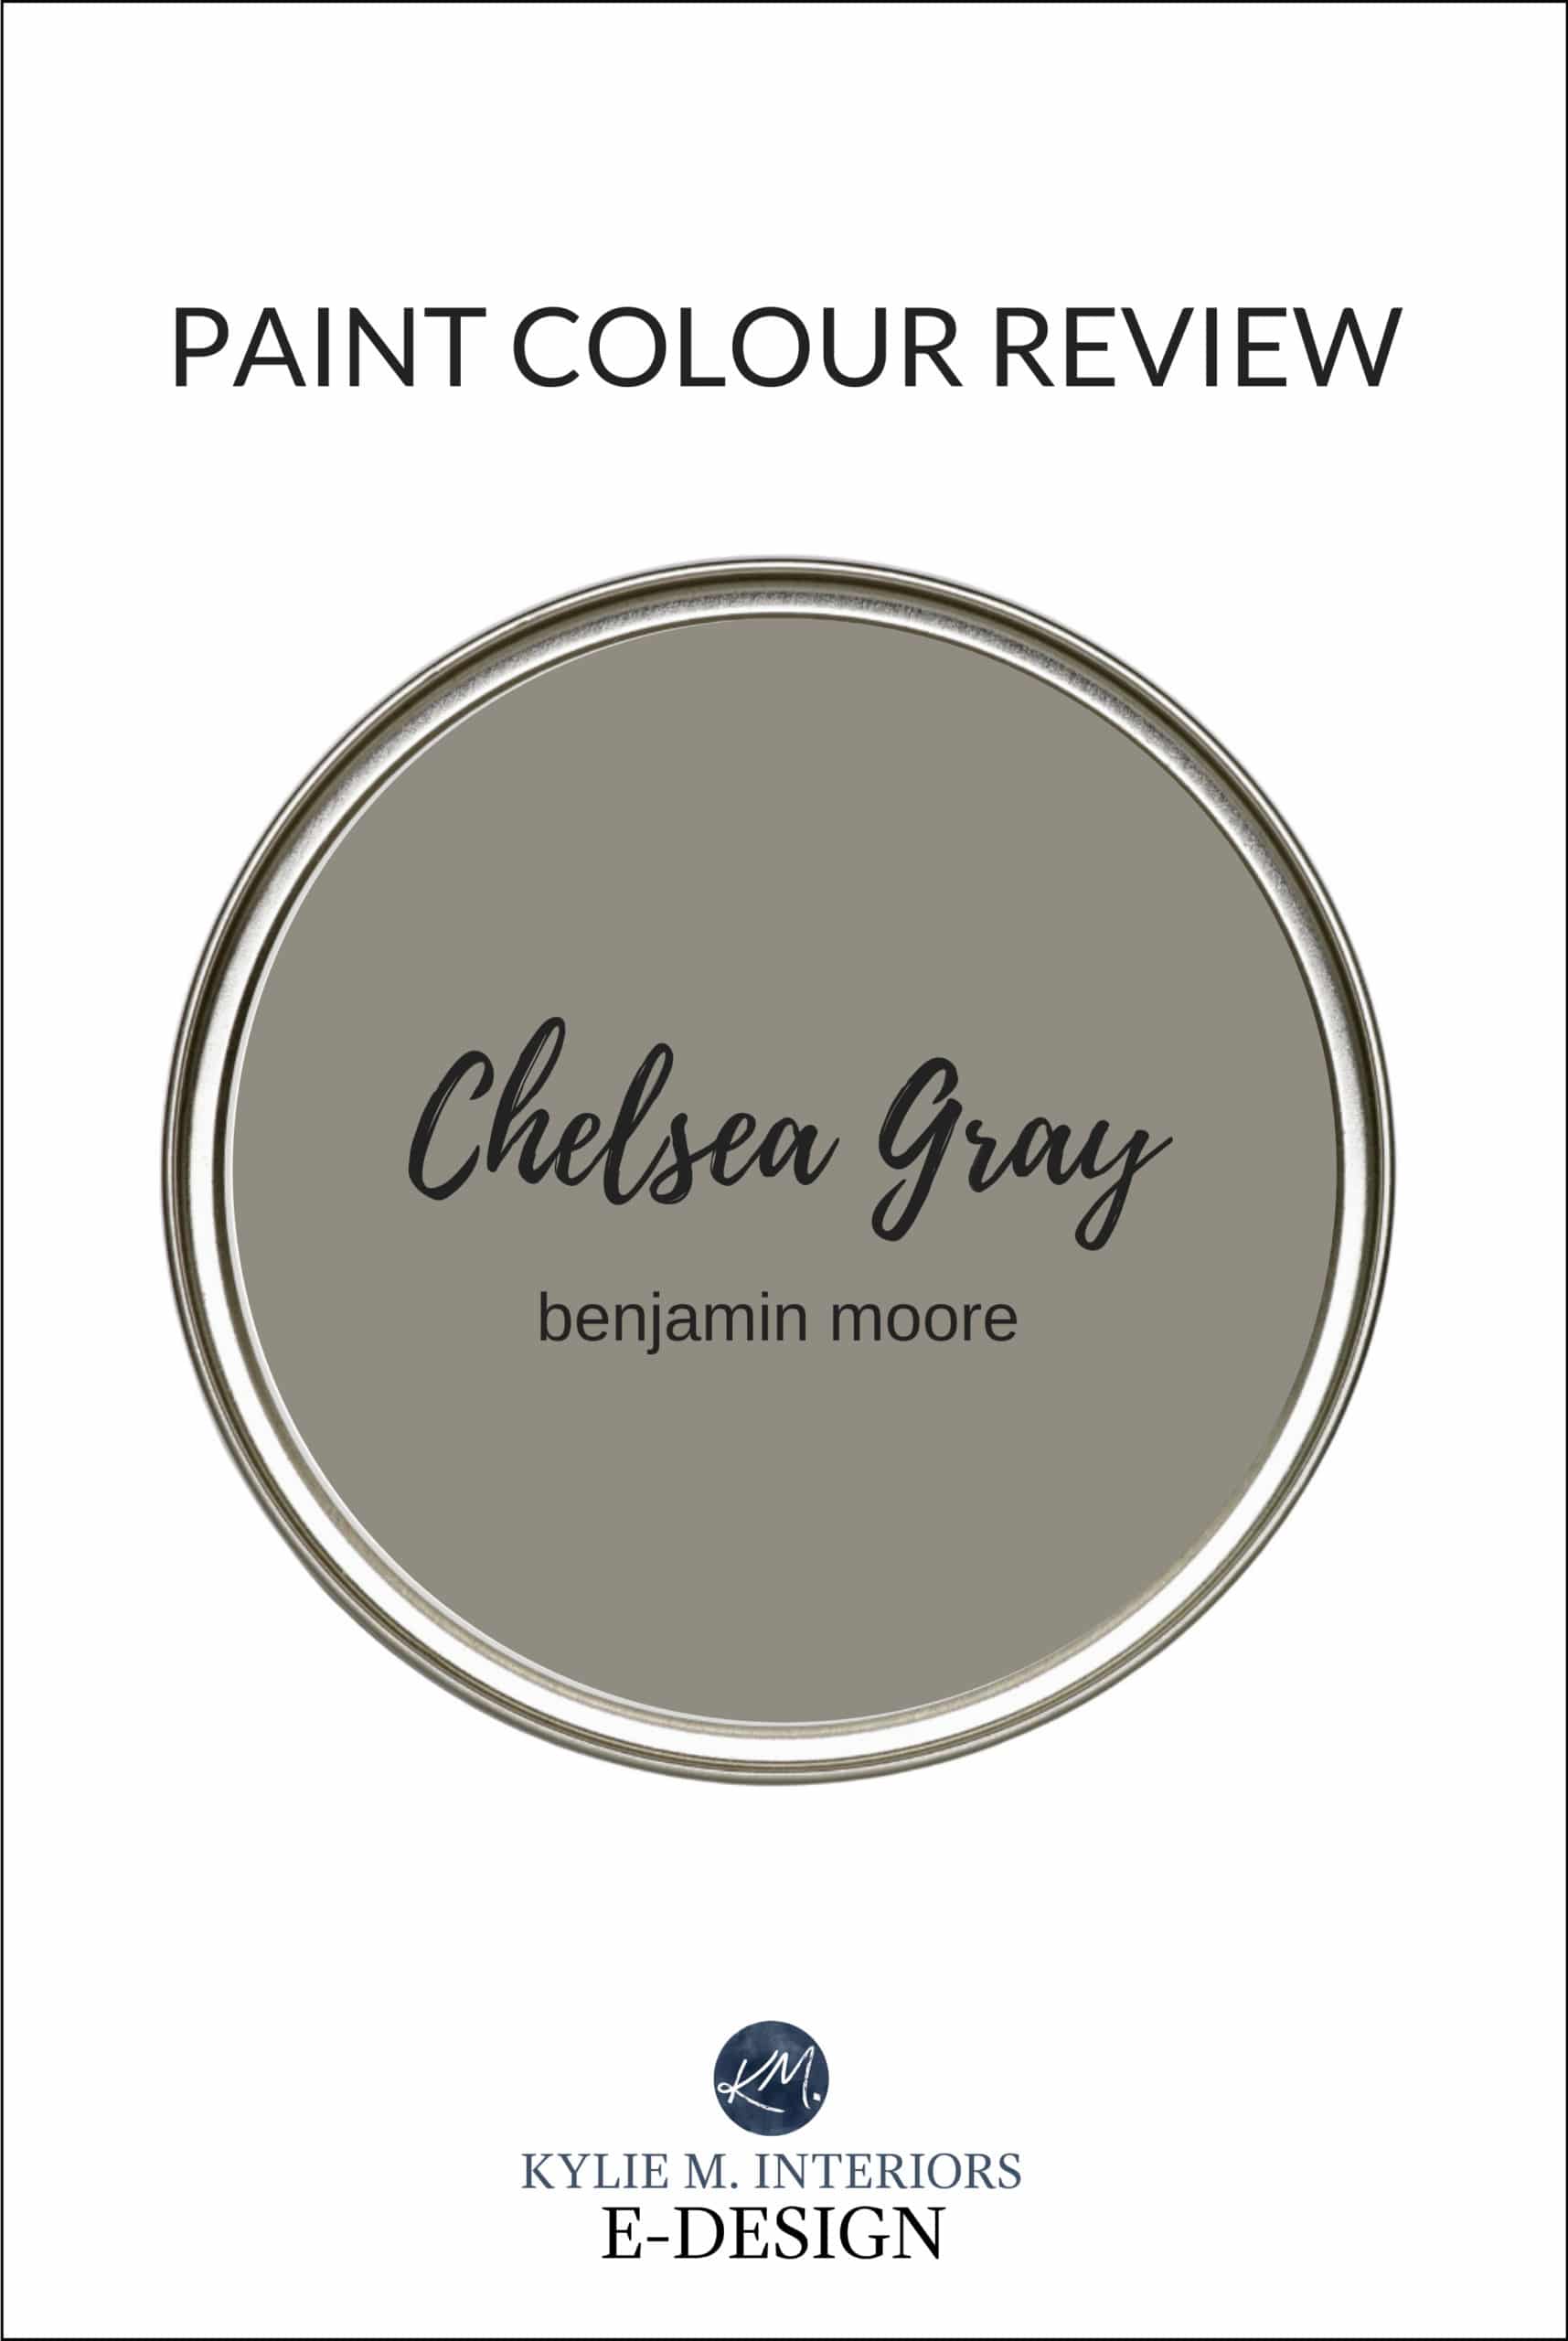 Paint colour review, best gray charcoal paint color Benjamin Moore Chelsea Gray. Cabinets, walls, islands, exteriors. Kylie M Interiors Edesign, online paint colour consulting and diy advice